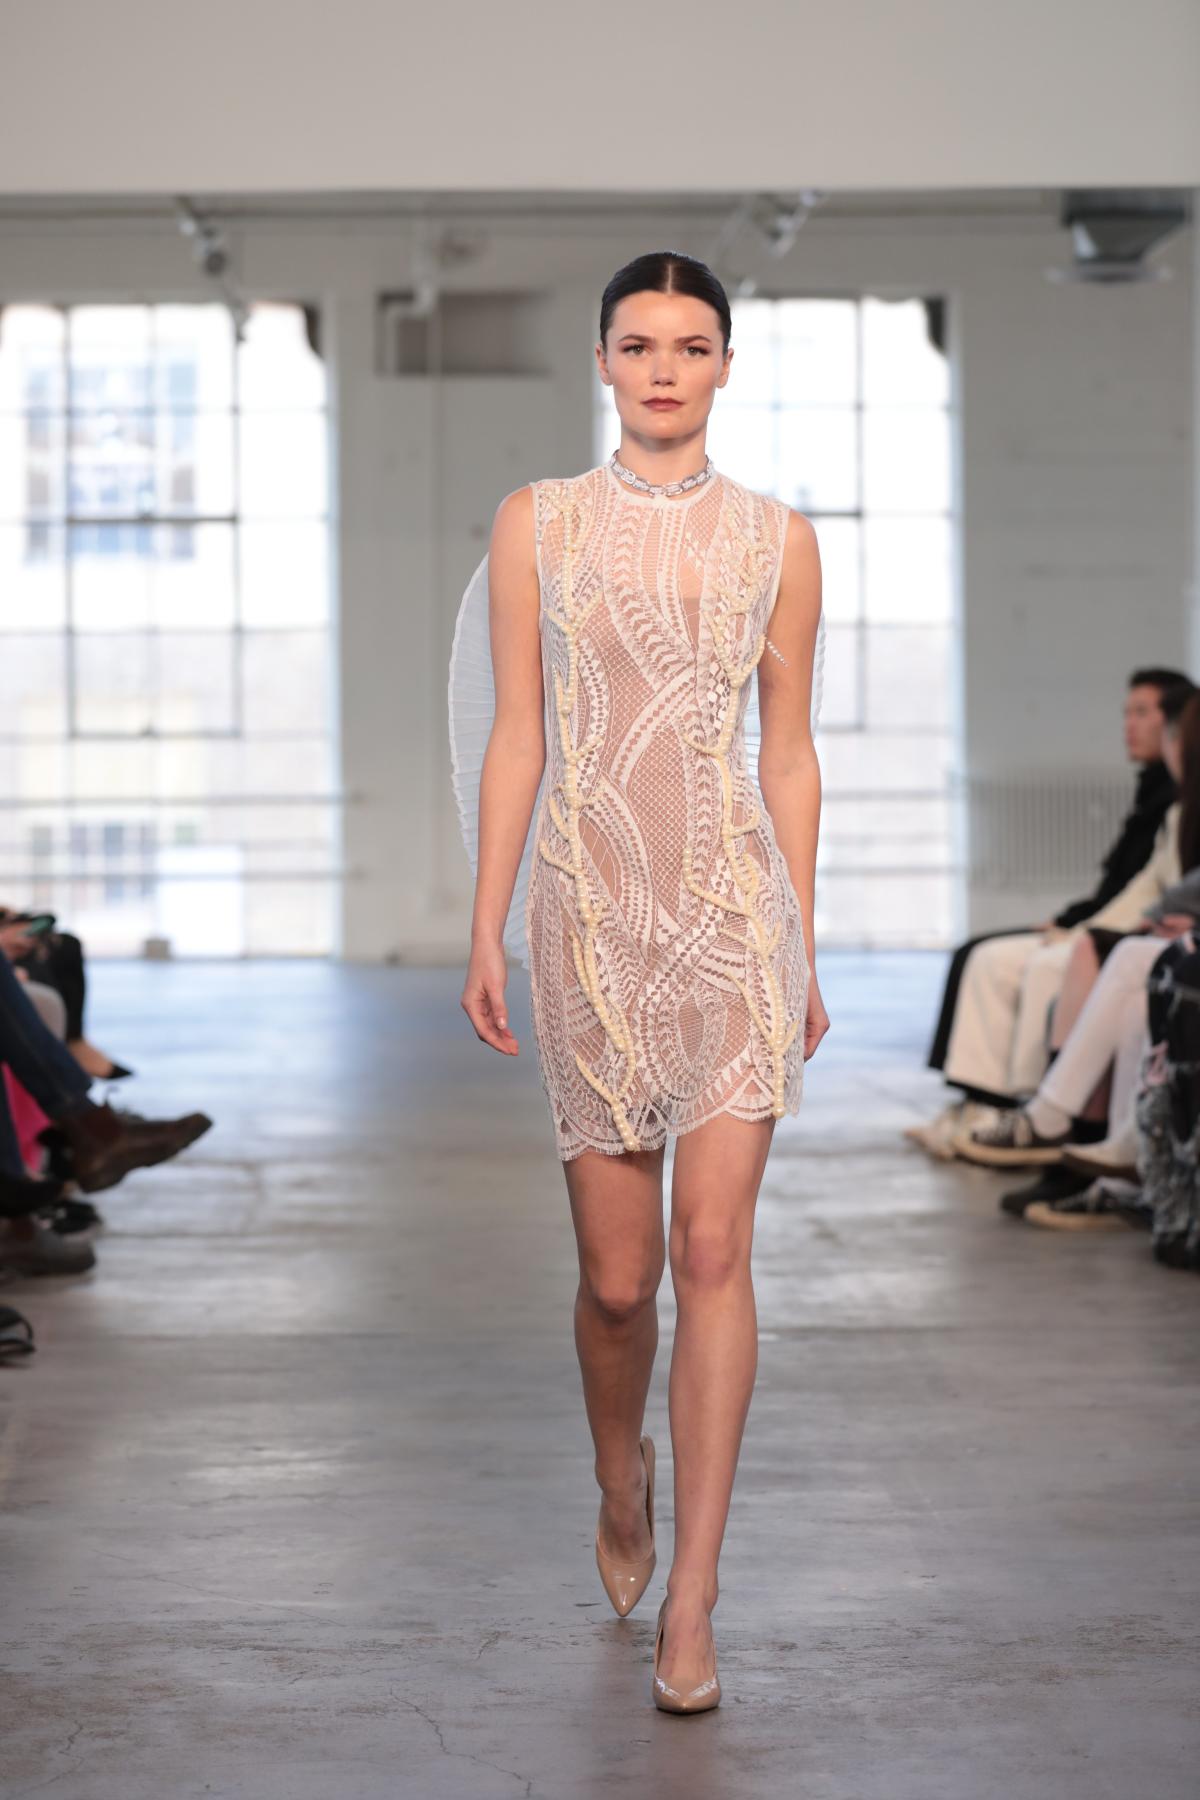 The Solstiss Academy Sponsors U.S. Fashion School Design Competition ...